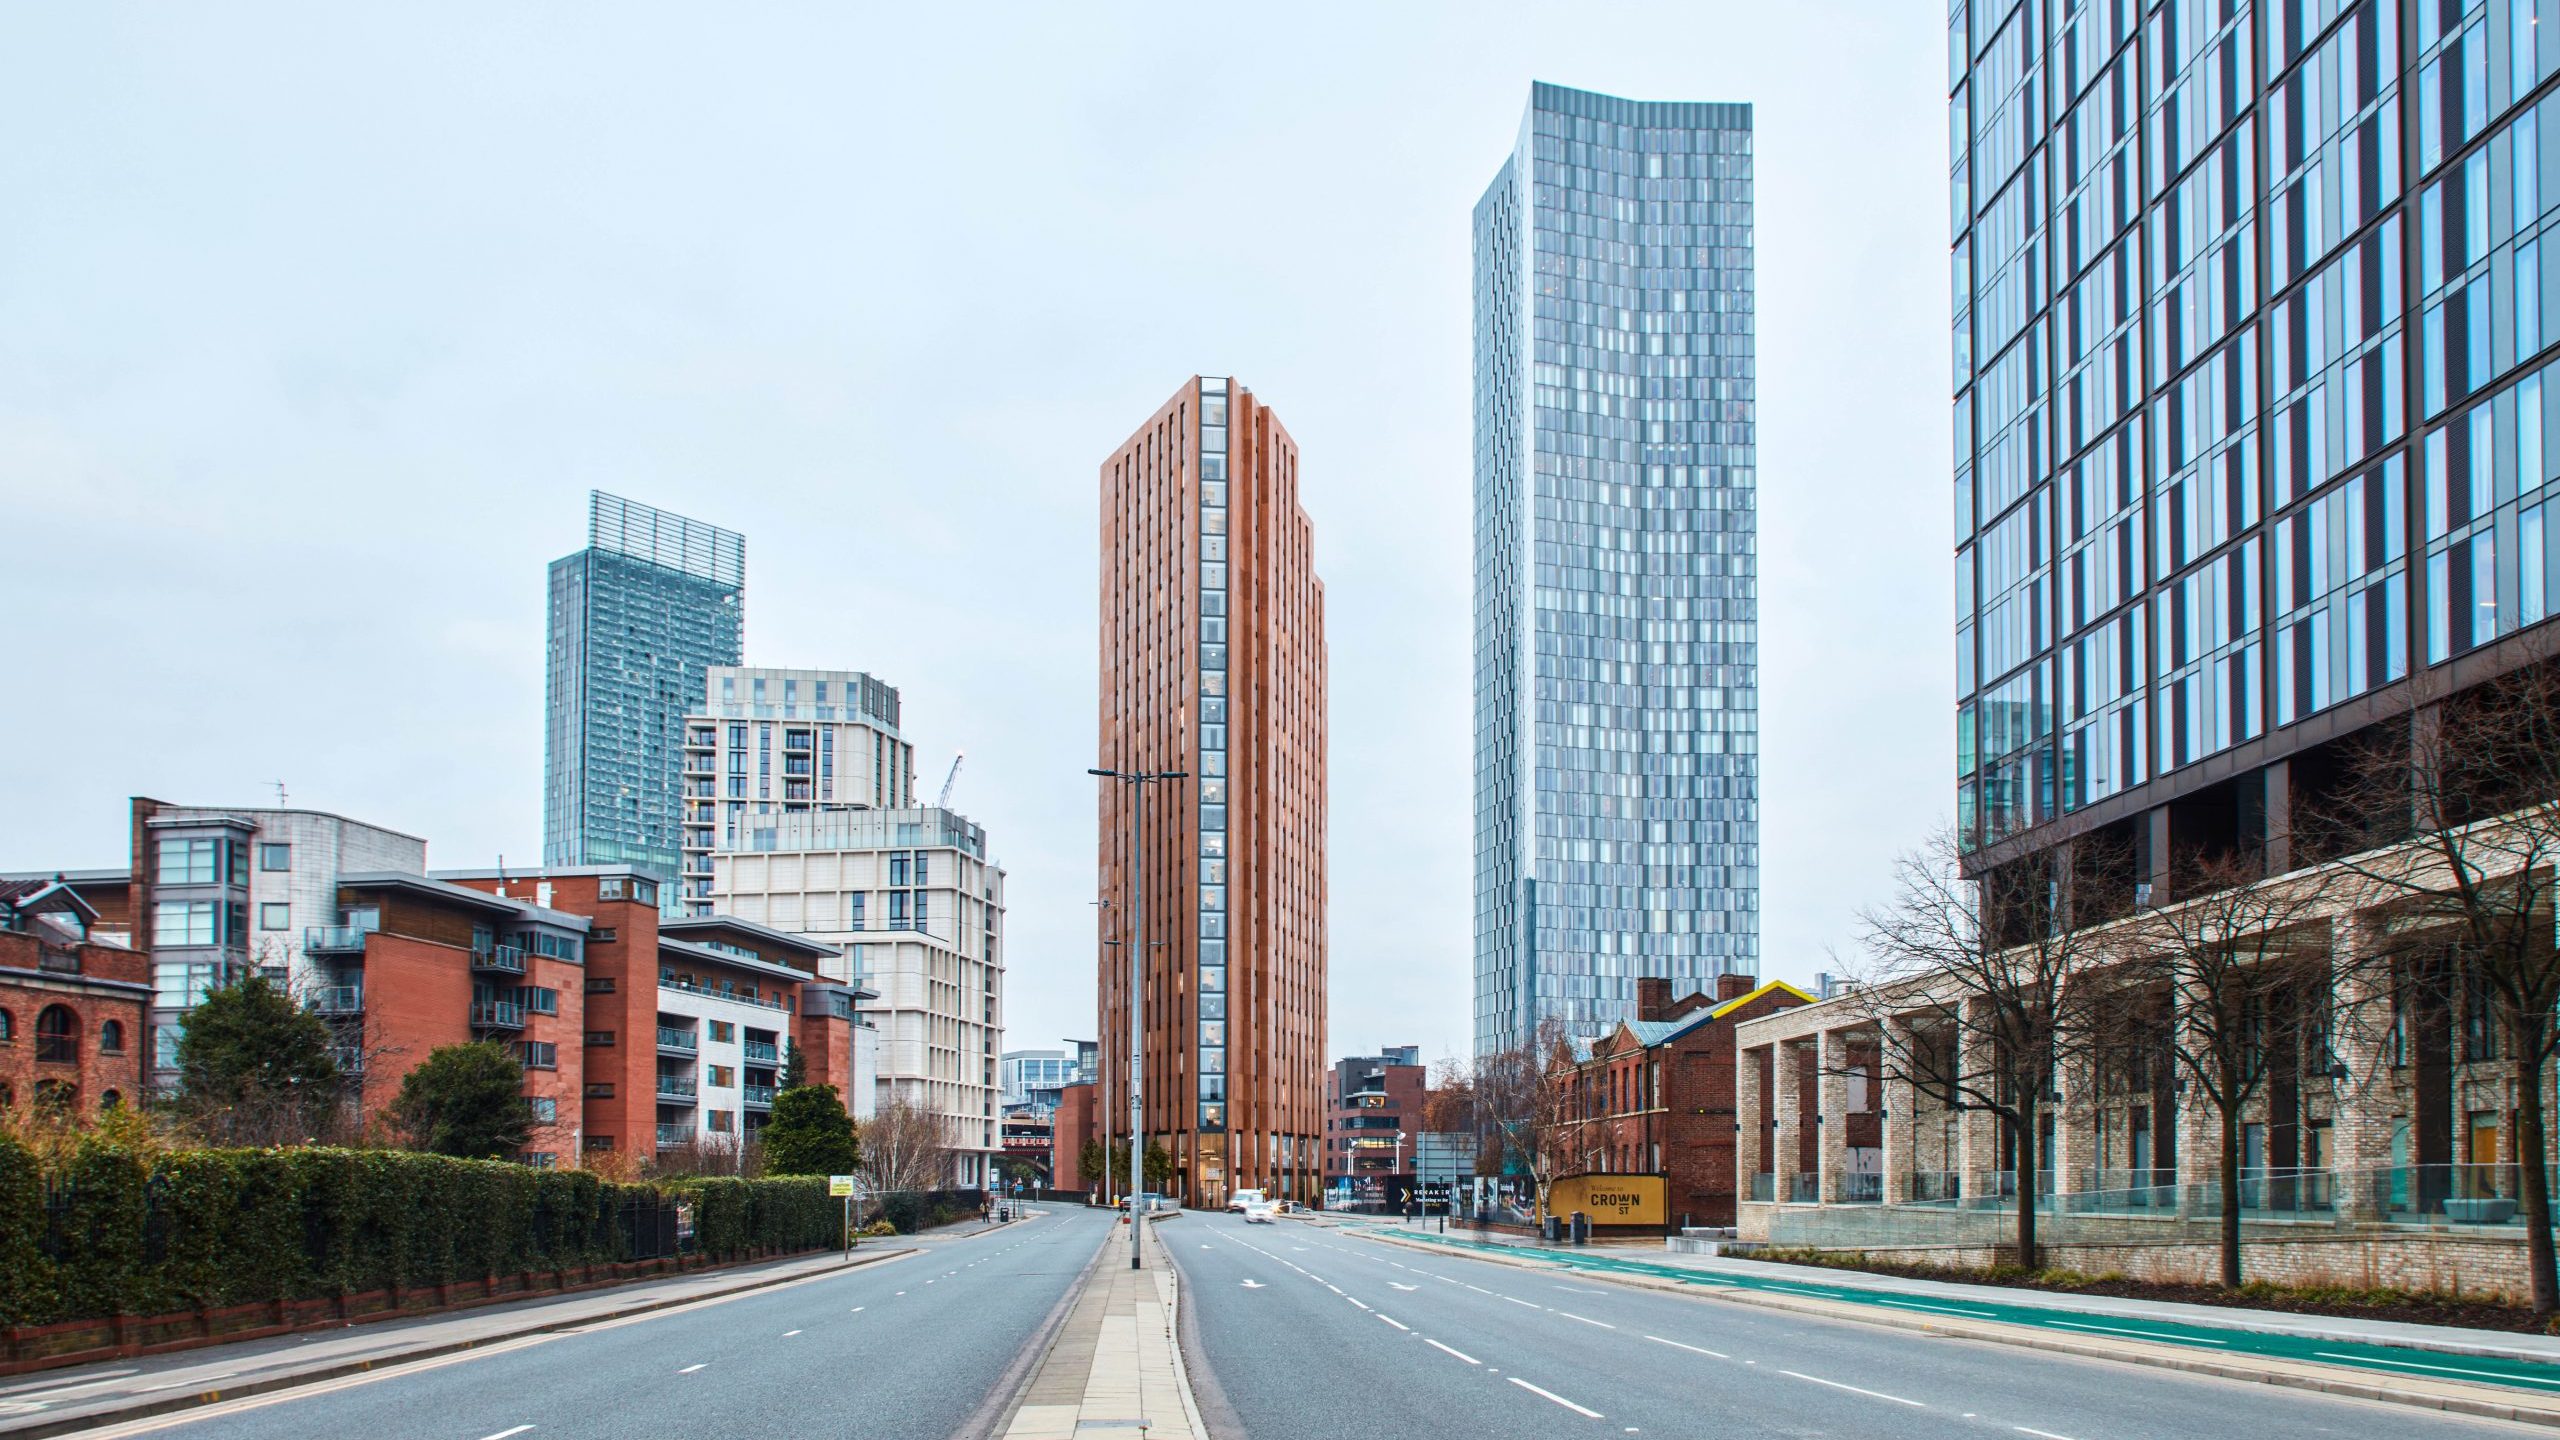 Deansgate student accommodation